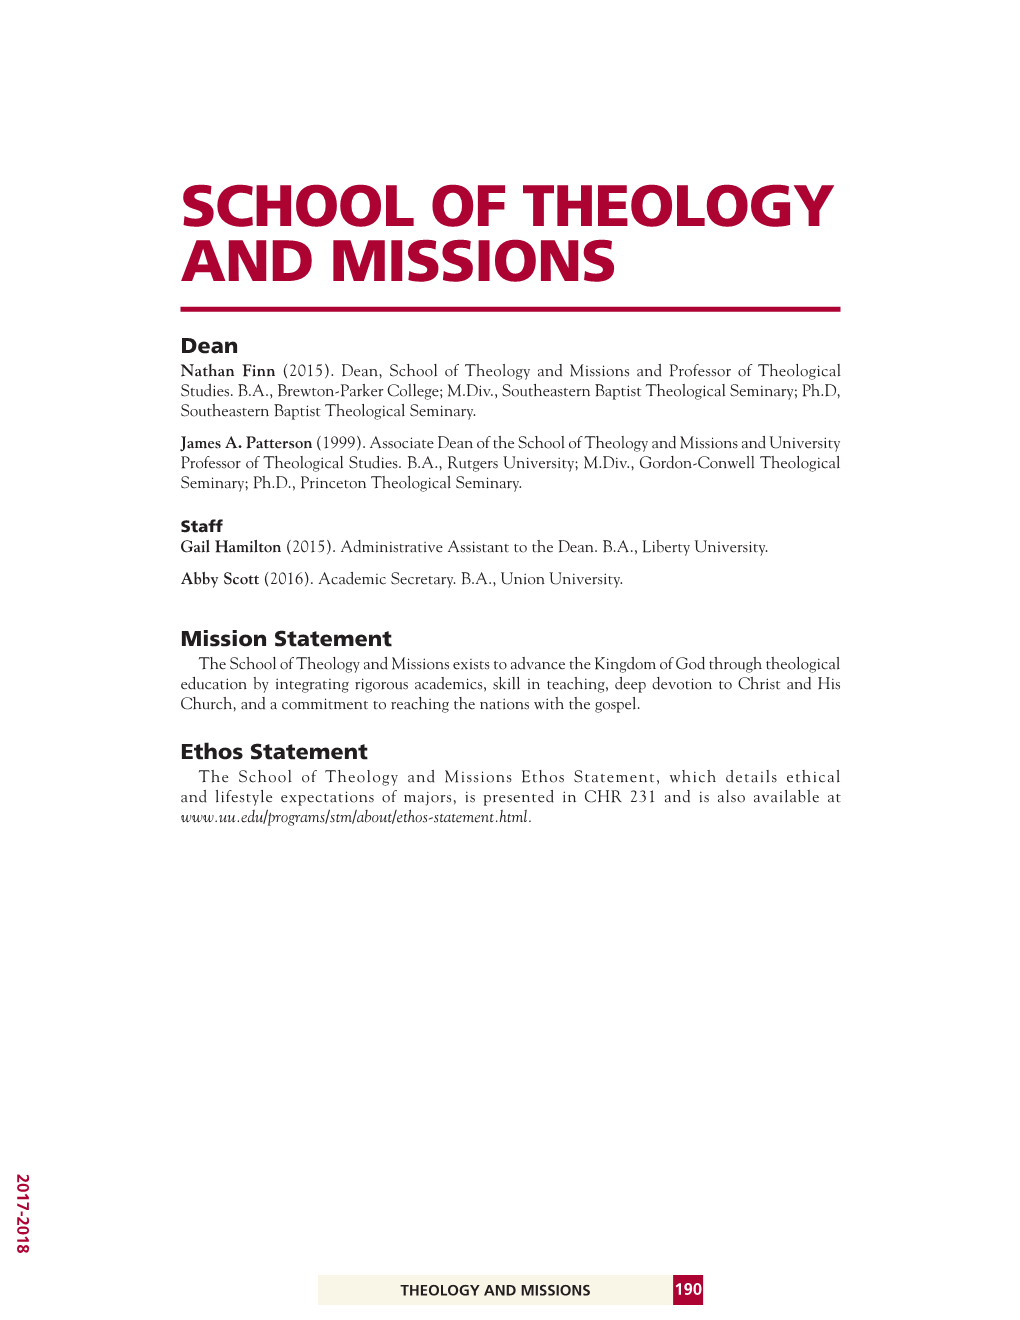 School of Theology and Missions